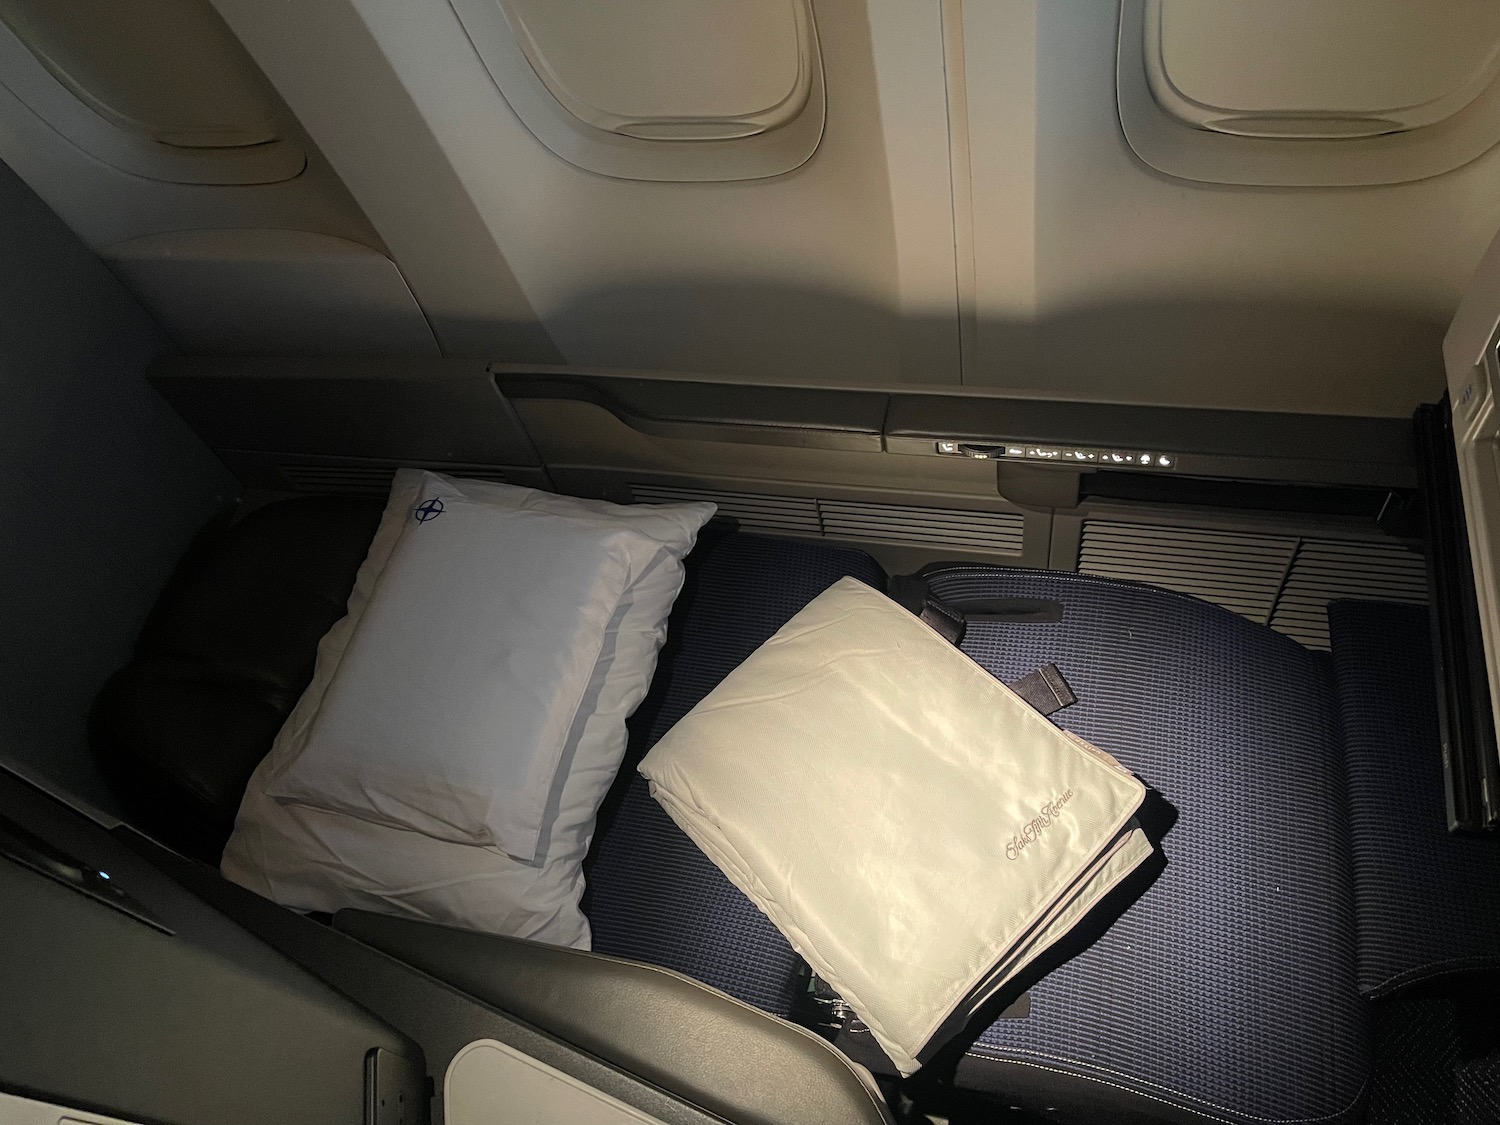 a seat with pillows and a white pillow on it